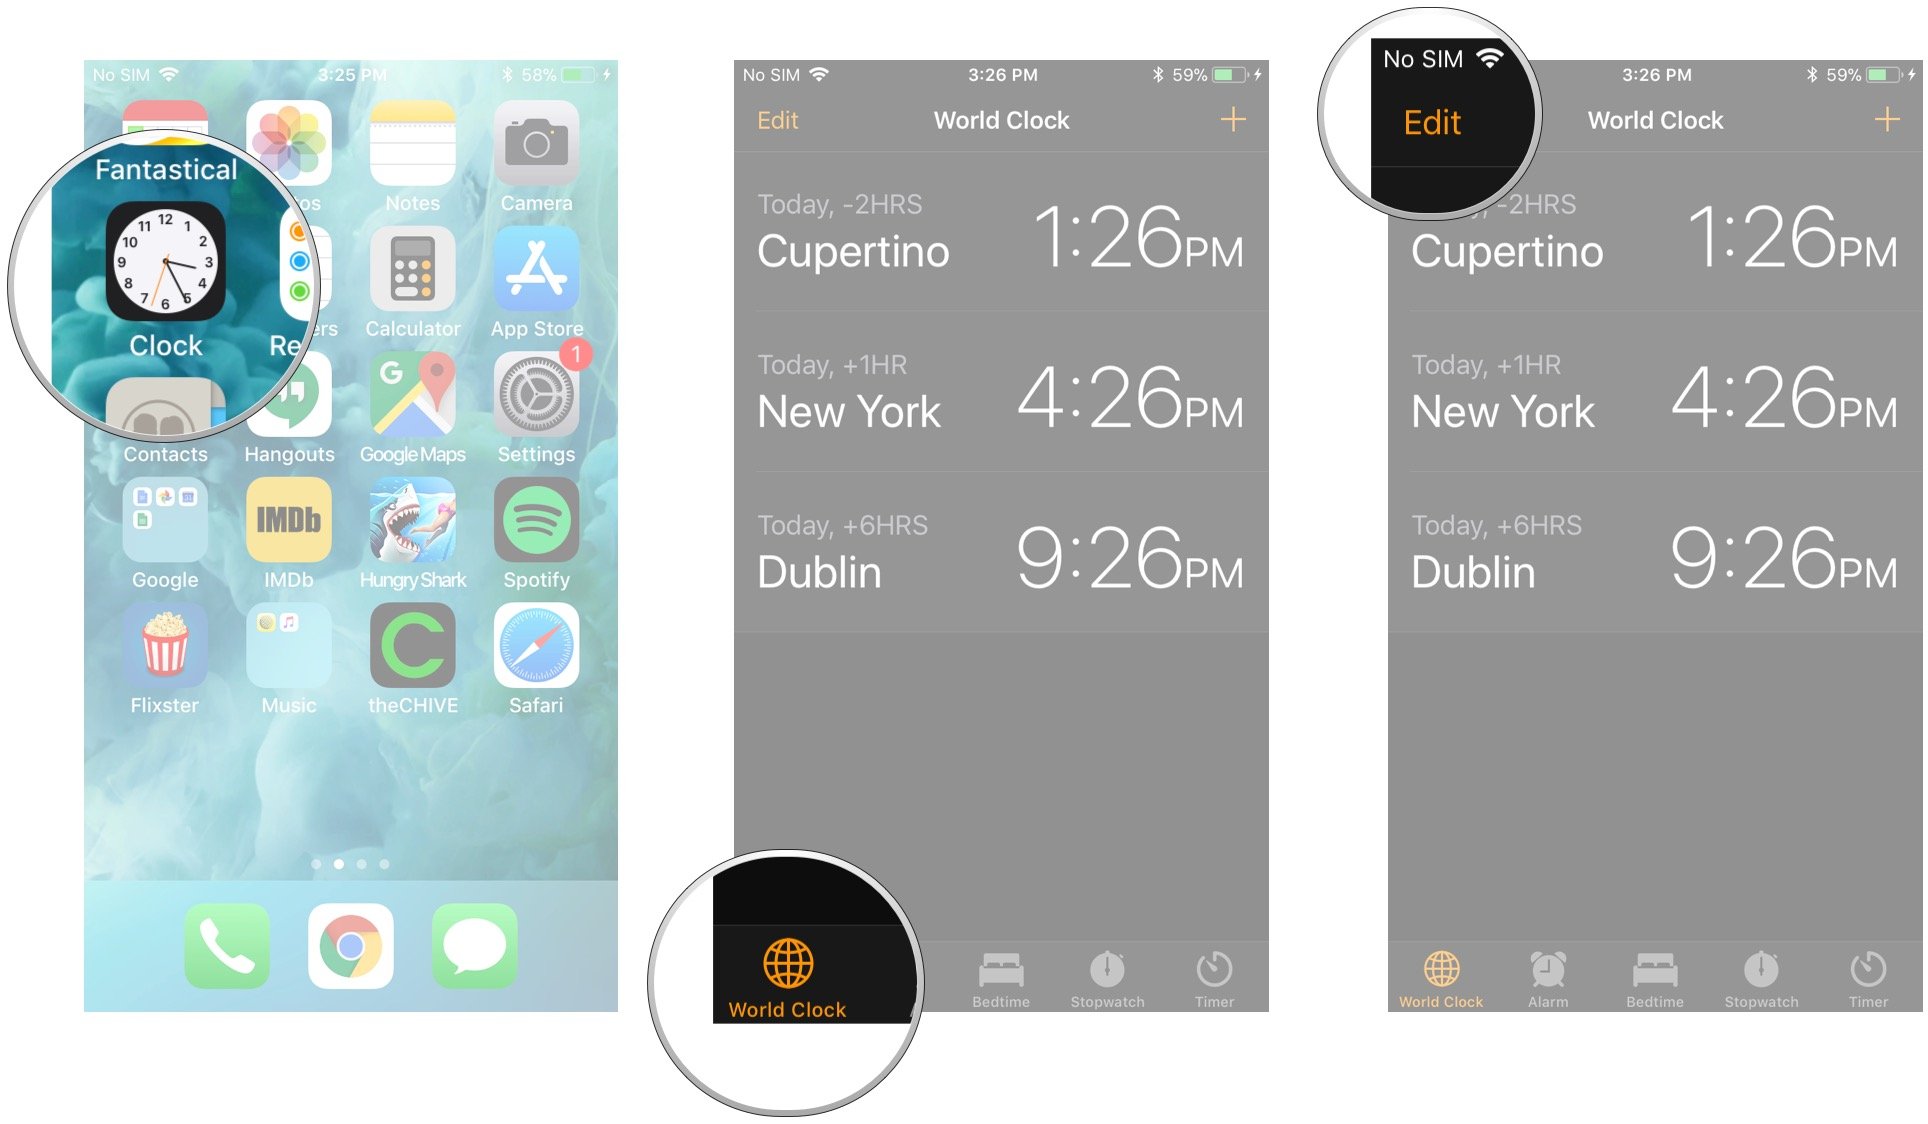 Re-order the cities in the World clock: Launch the Clock app, tap the World Clock button, tap Edit